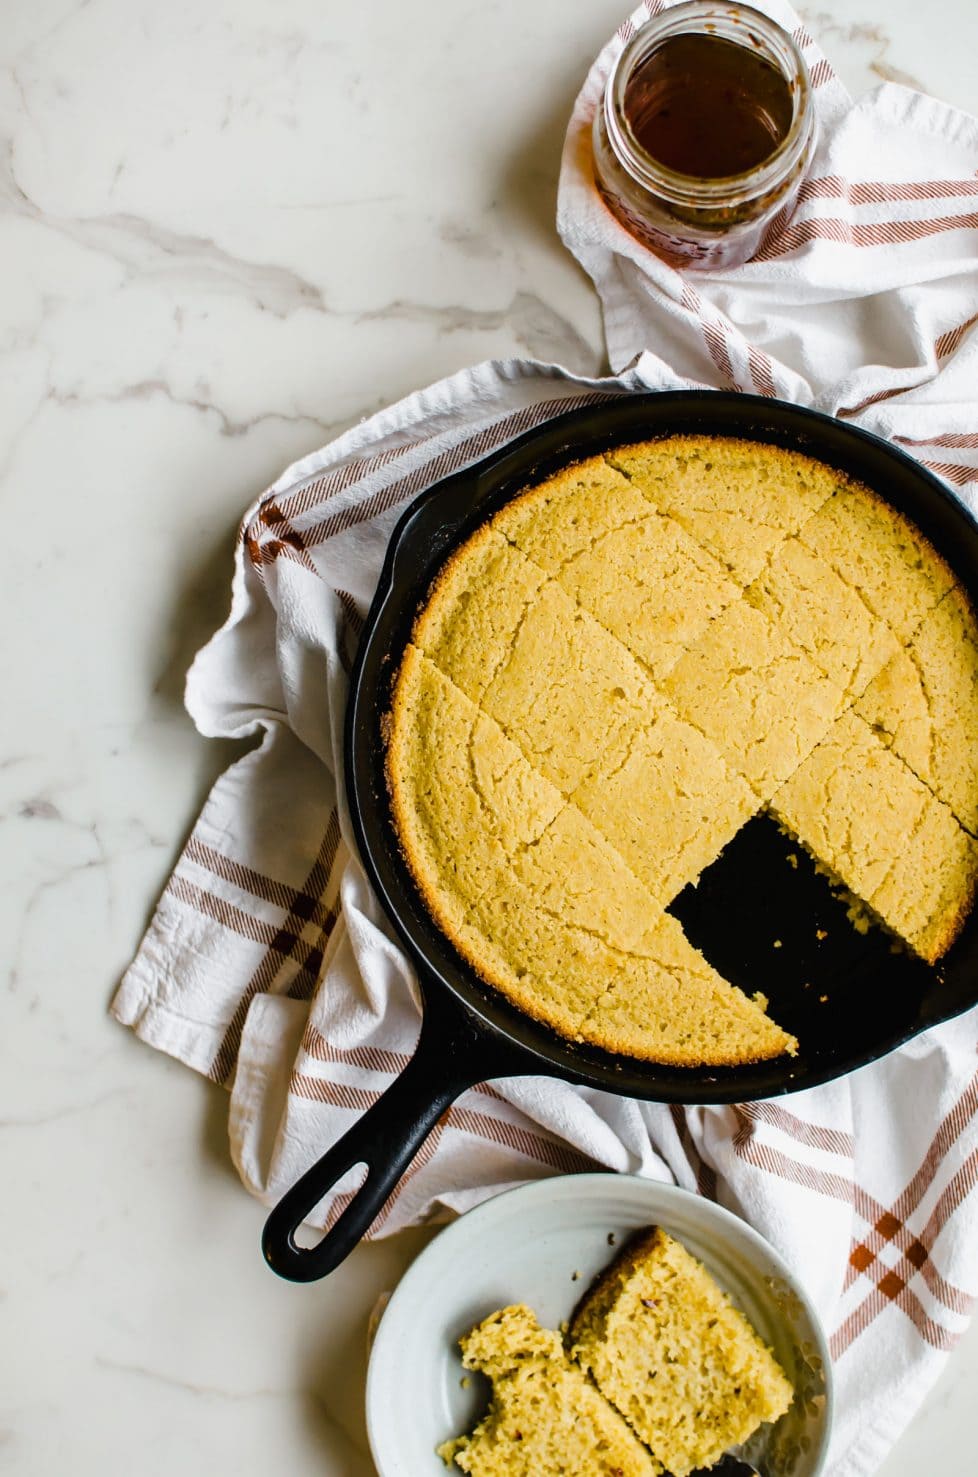 Overhead view of cast iron skillet with cornbread and a jar of honey.